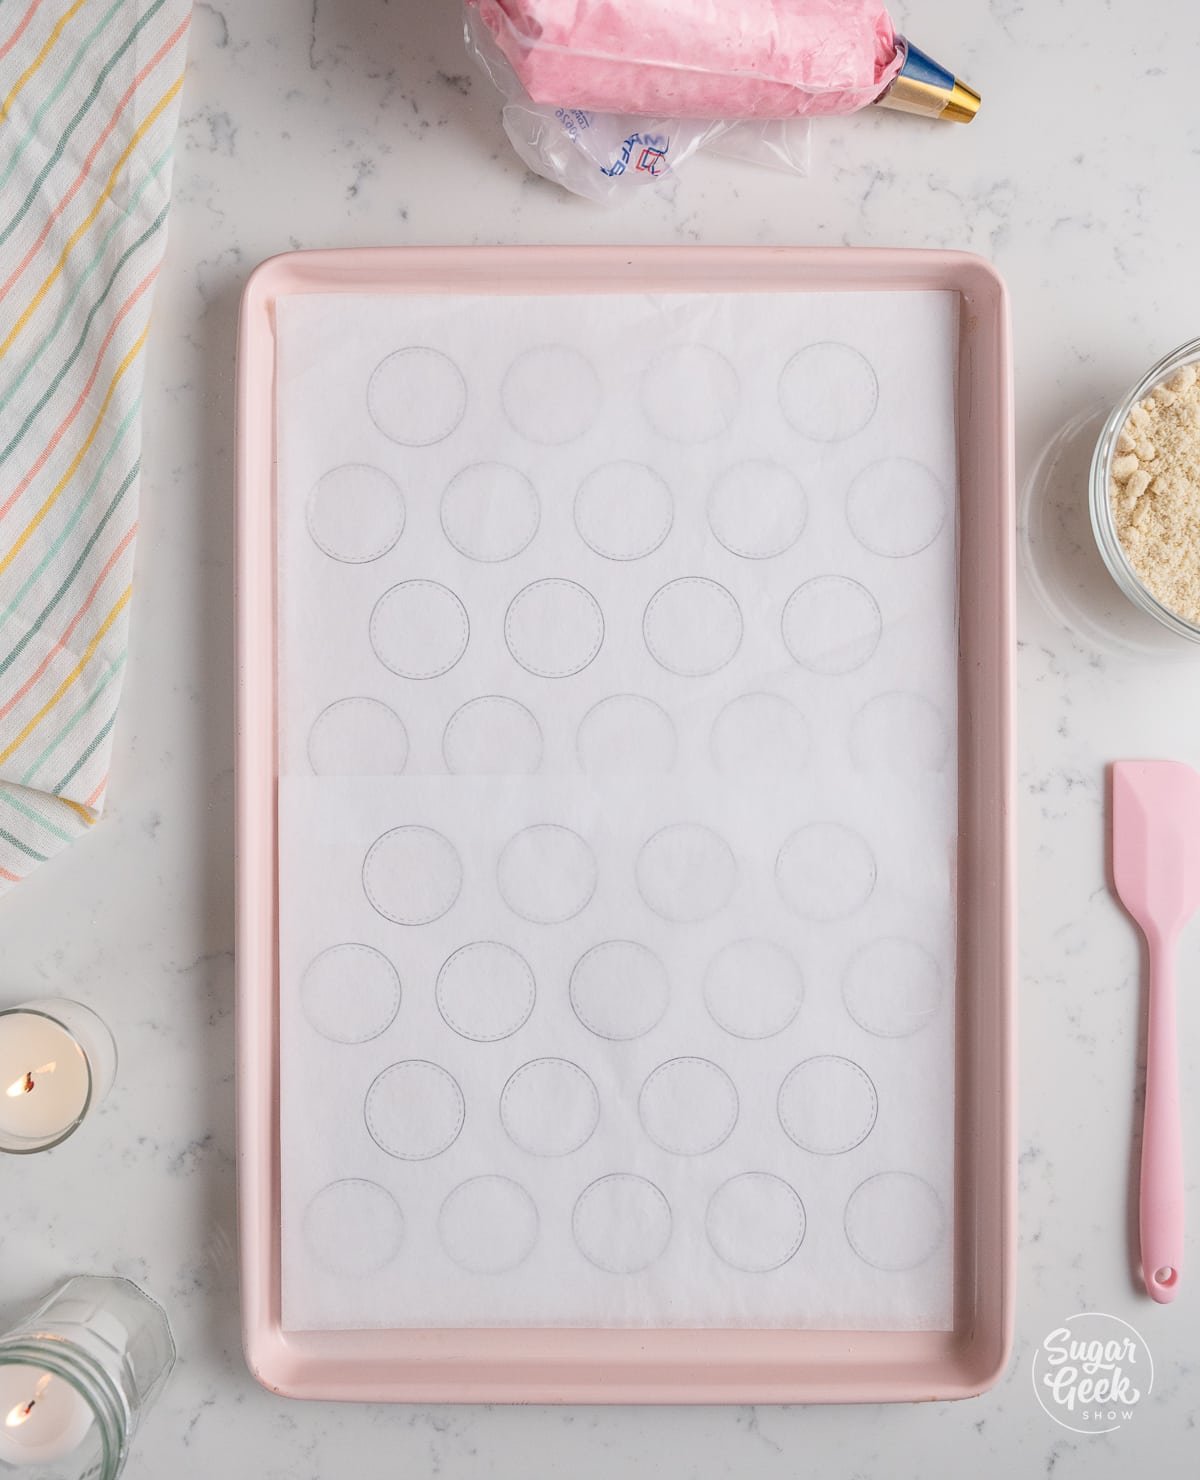 baking tray lined with parchment paper and macaron templates